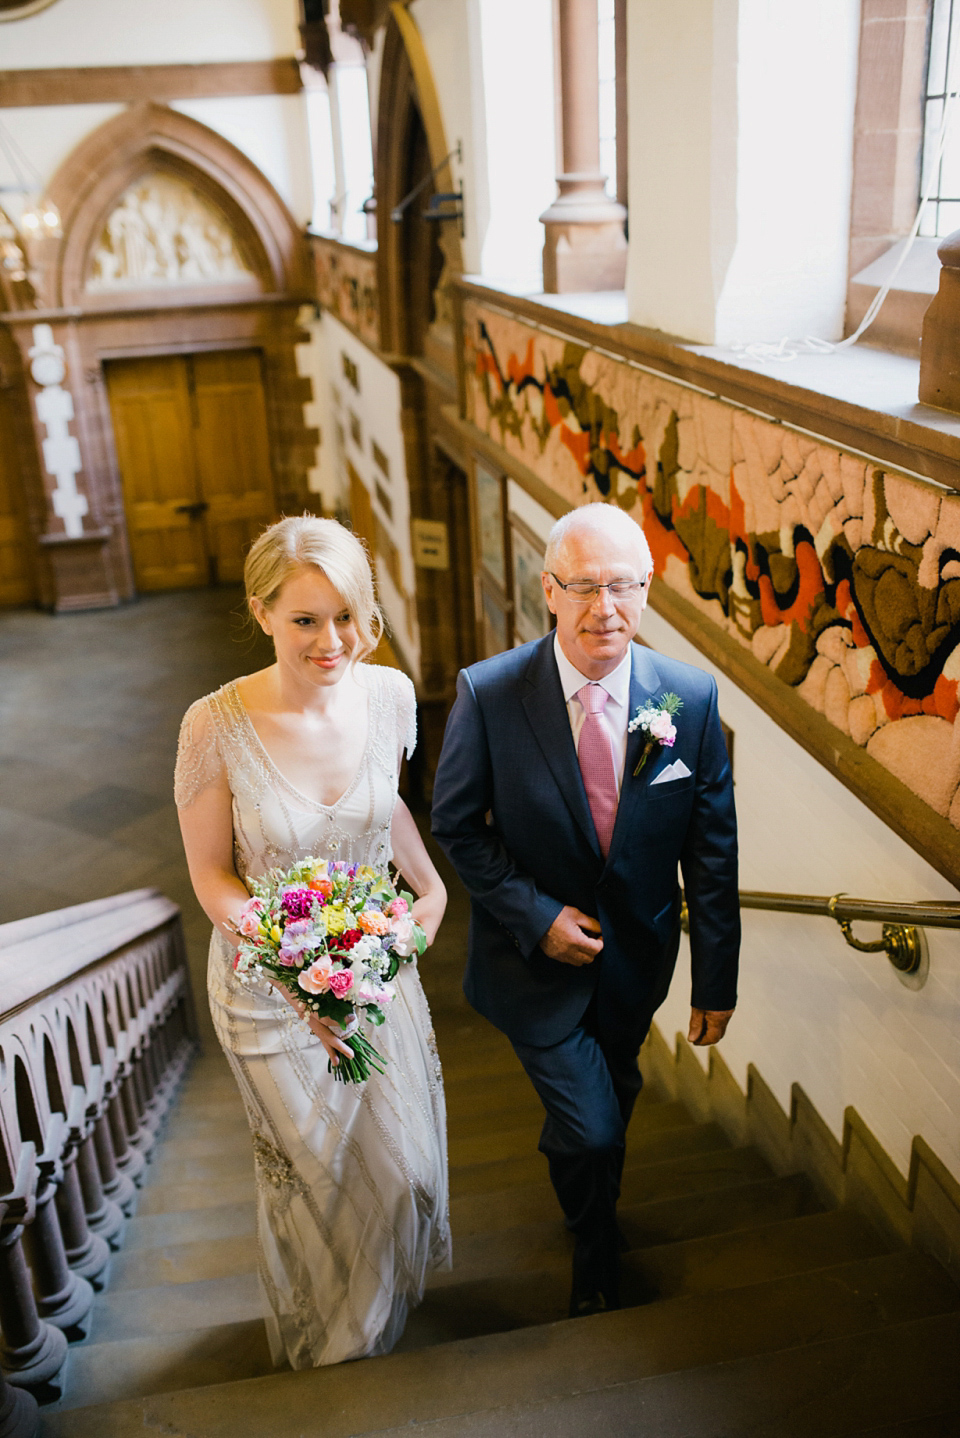 Kat wears Eden by Jenny Packham for her pretty Summer village hall wedding. Photography by Emma B.